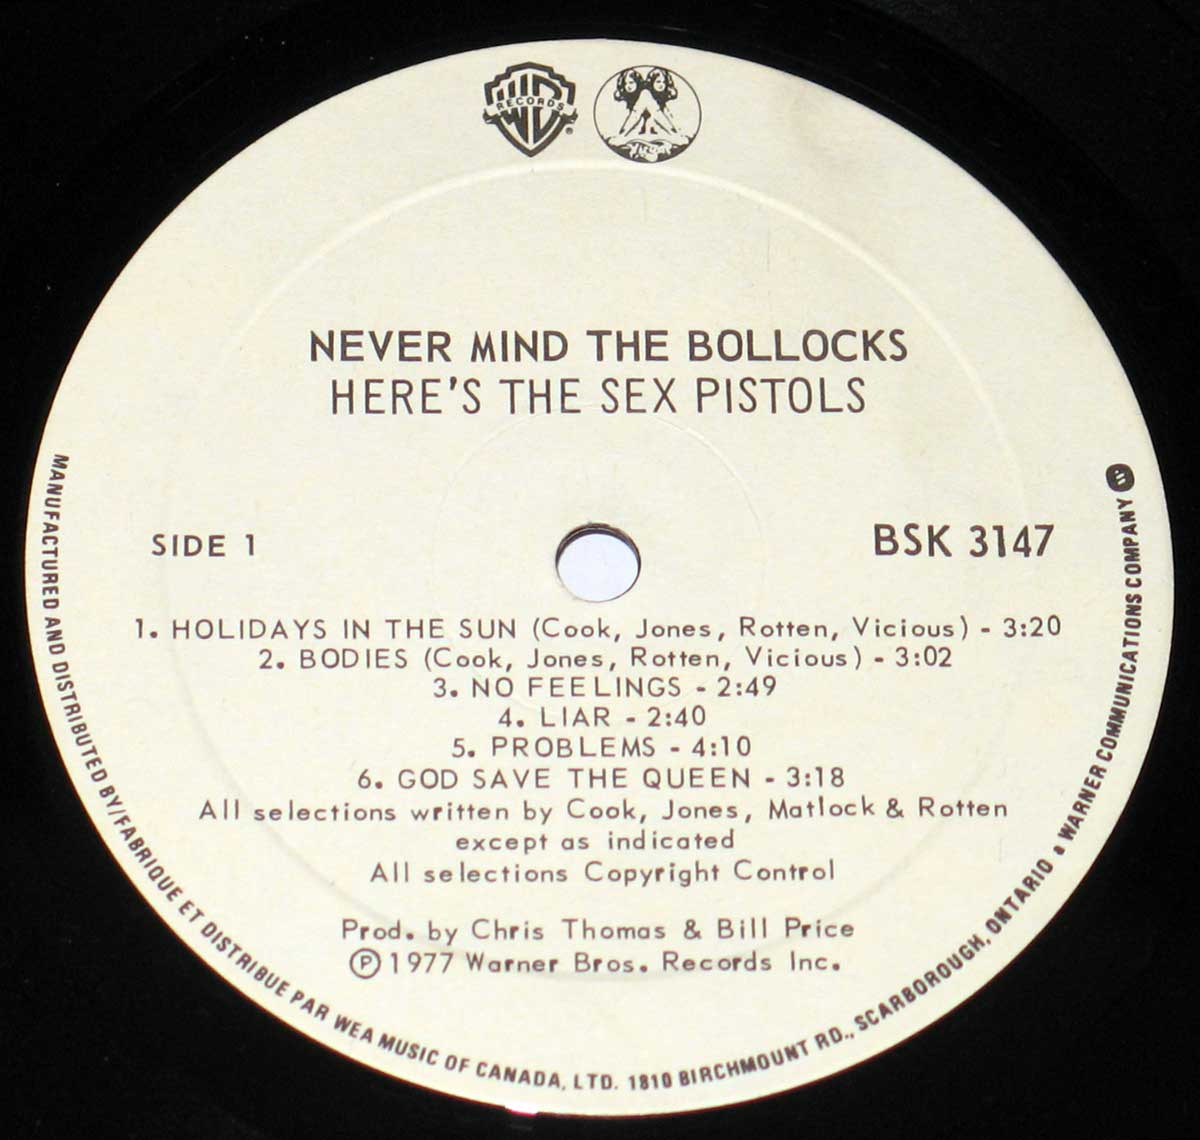 Photo of record label of SEX PISTOLS - Never Mind the Bollocks ( Pink Album Cover )  